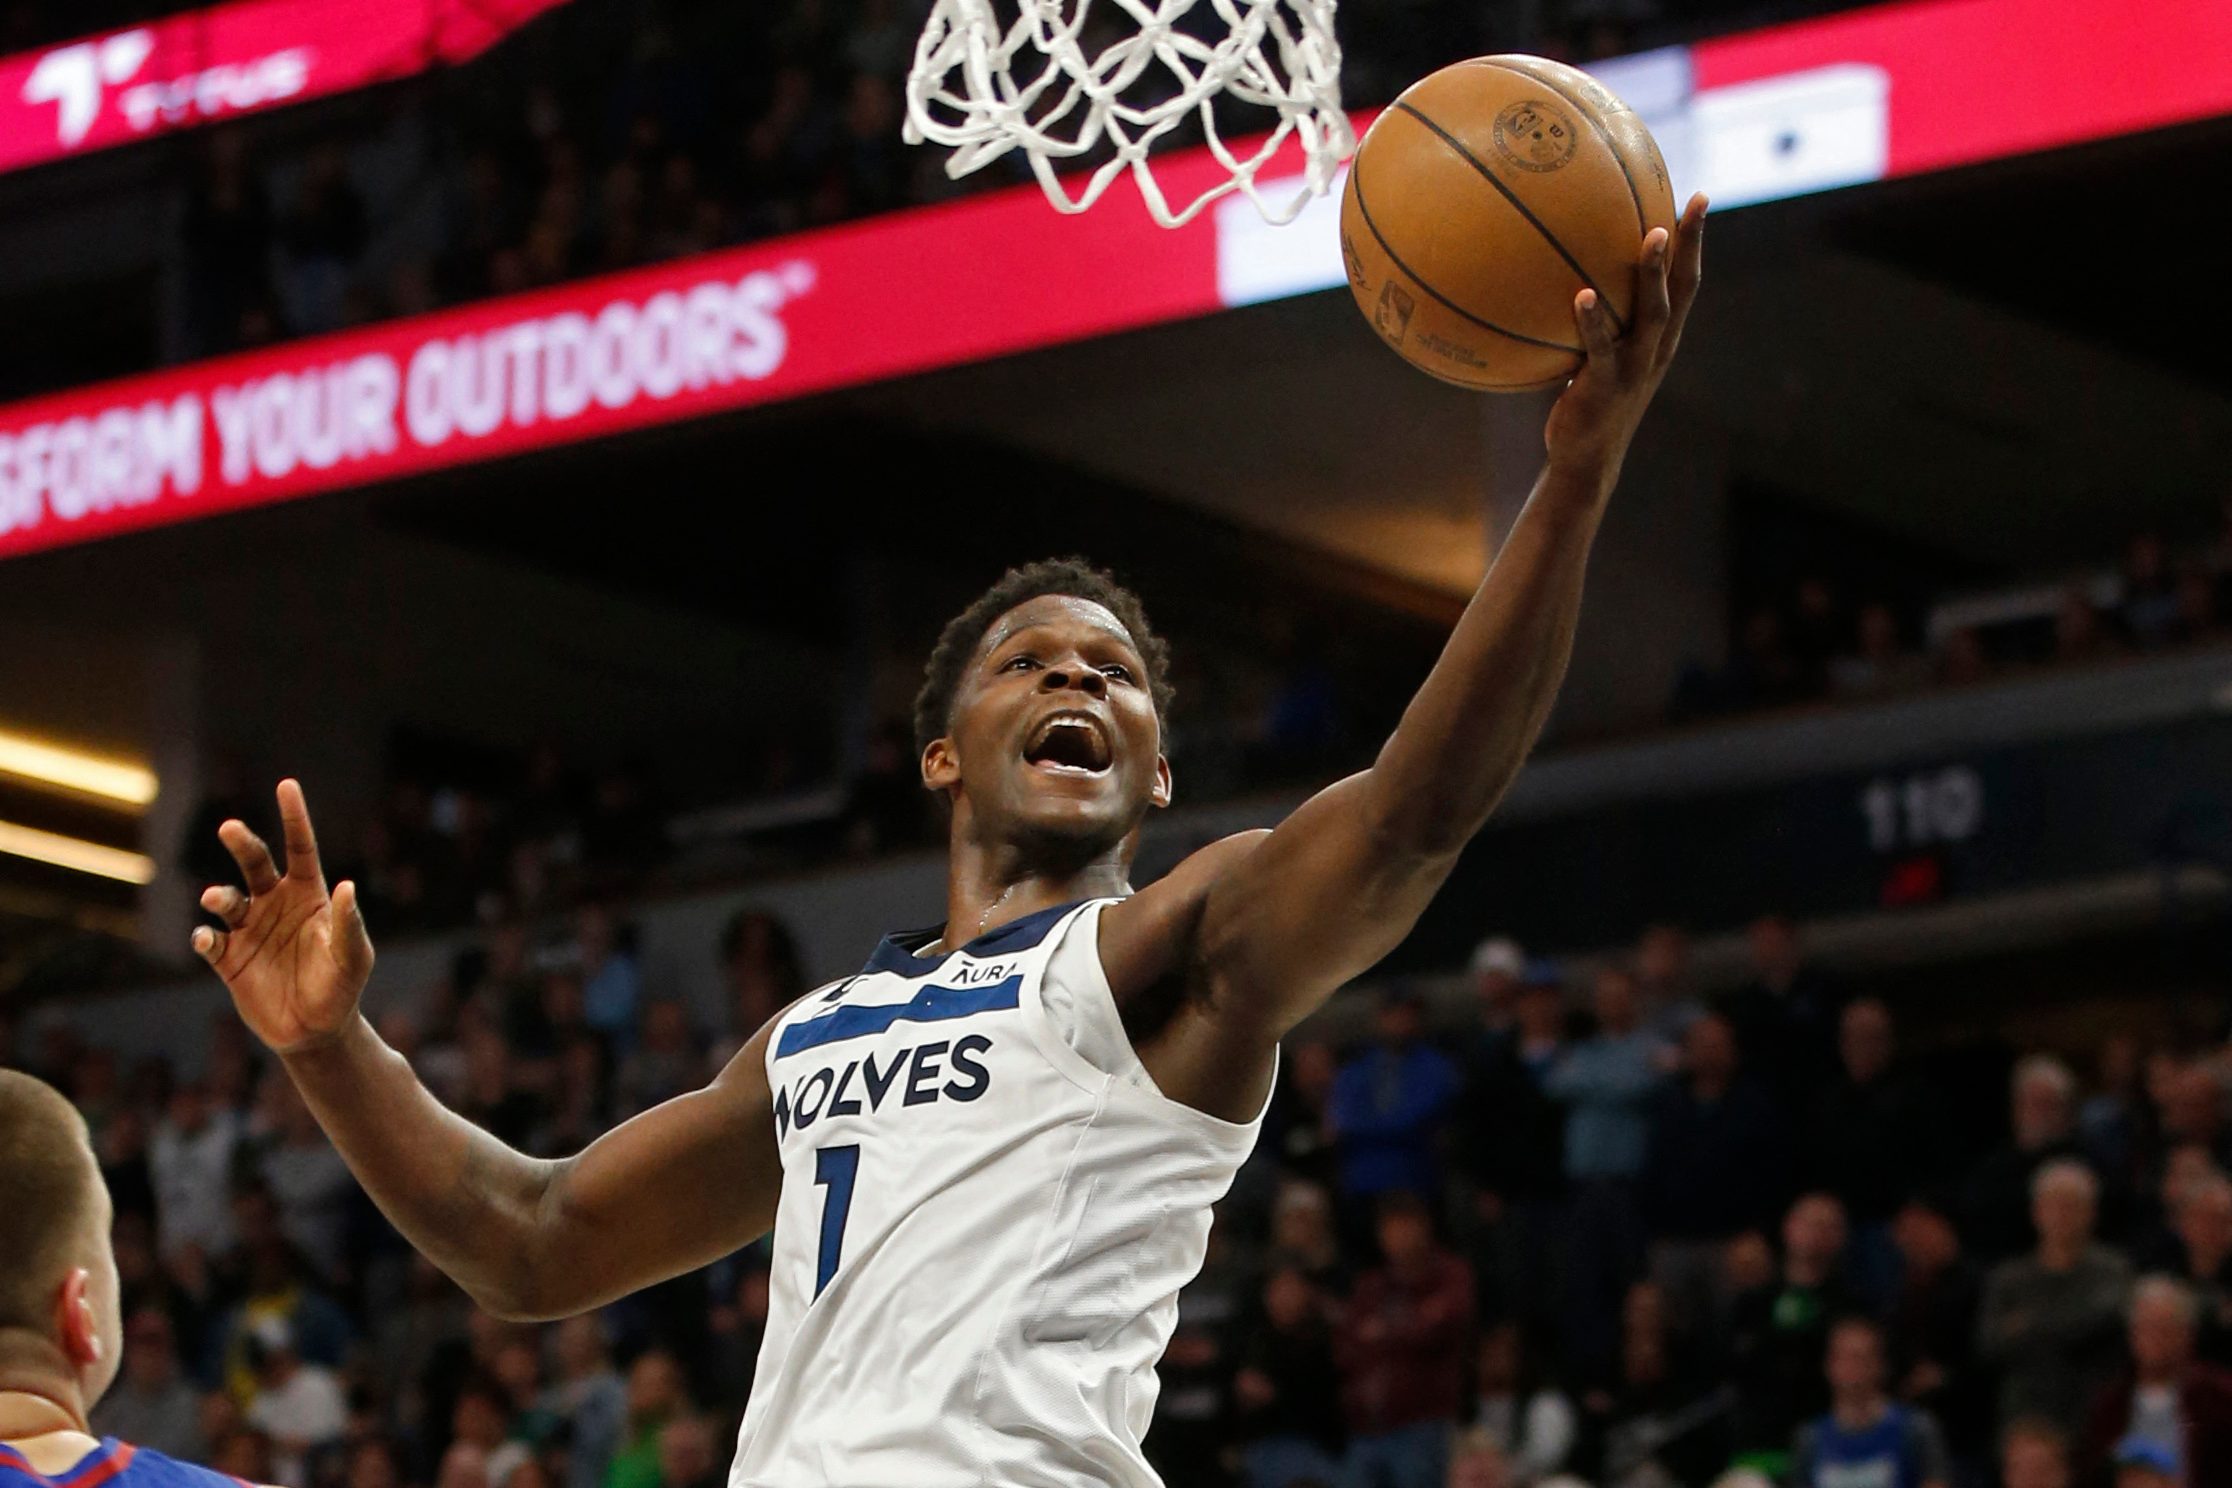 Wolves’ Anthony Edwards fined $50,000 for chair incident